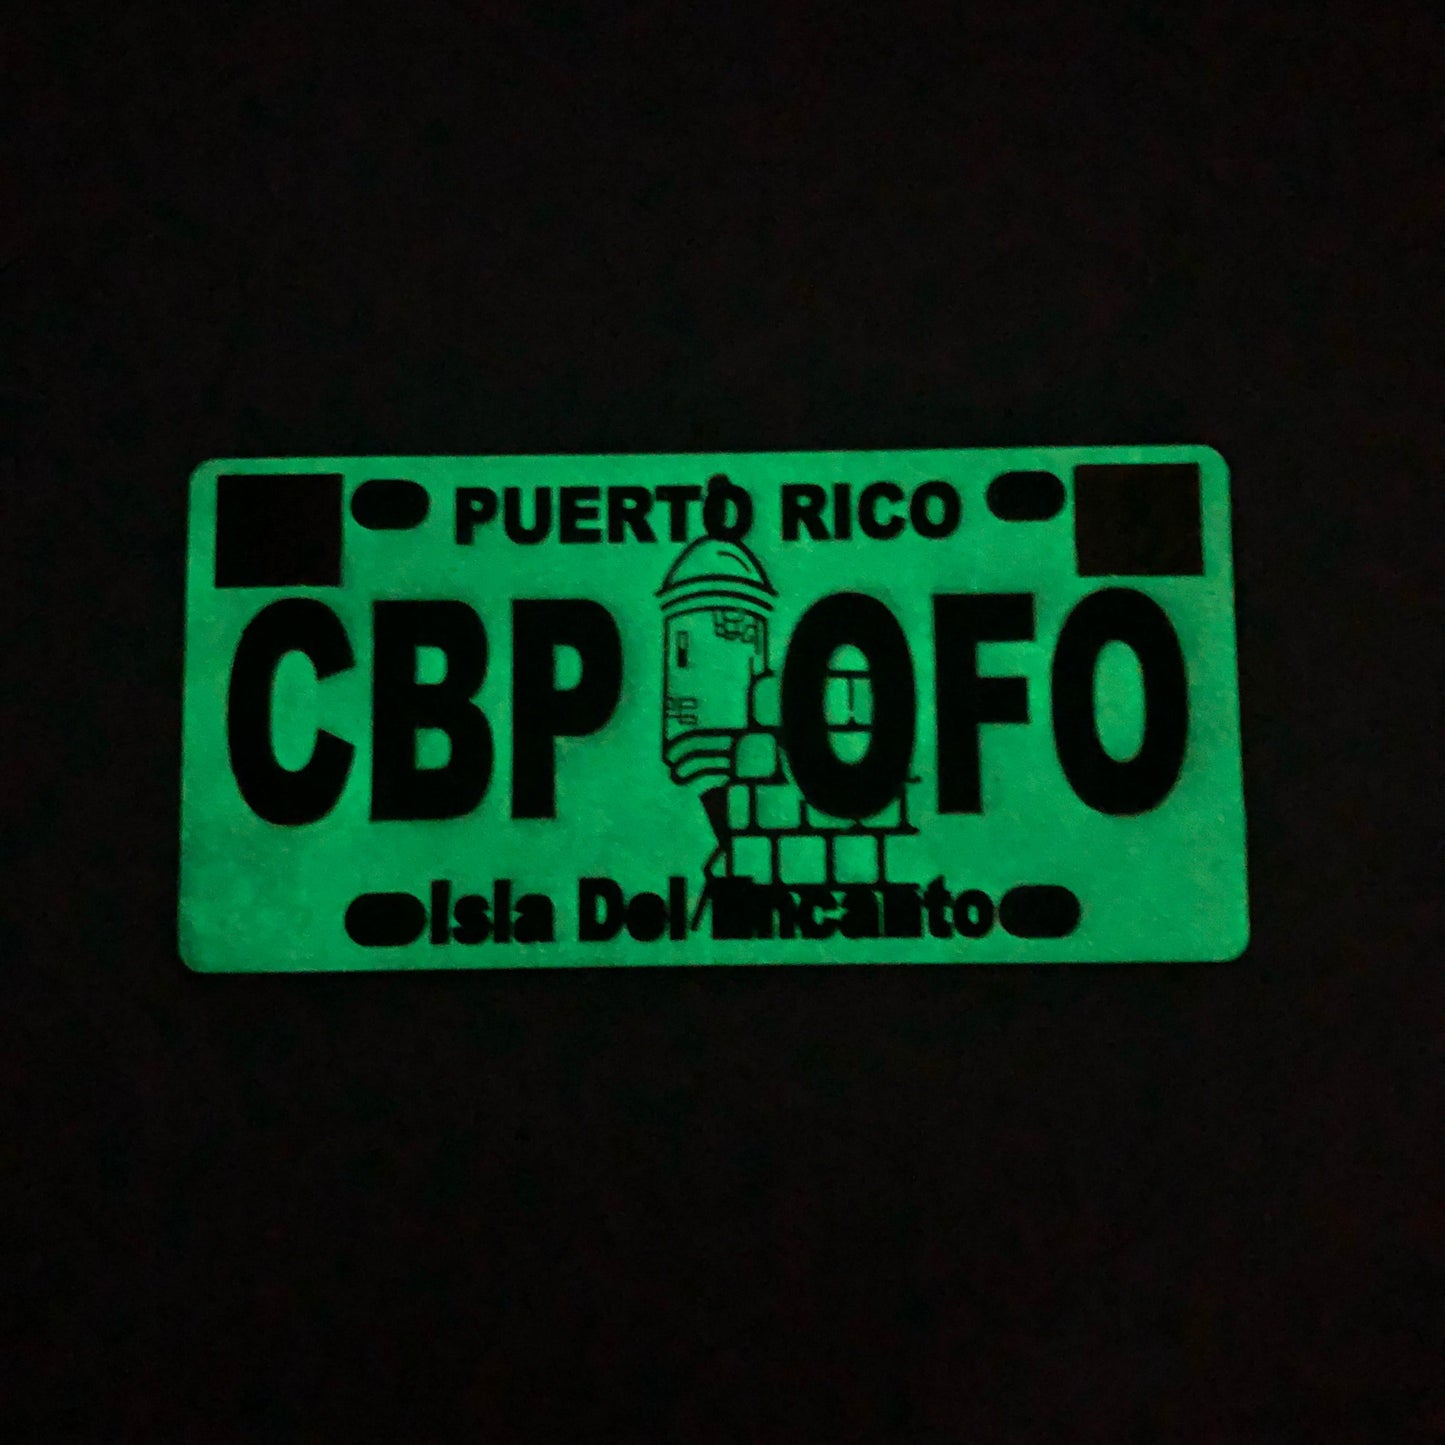 discontinued H-005 Puerto Rico License Plate Challenge Coin san juan CBP Officer Police